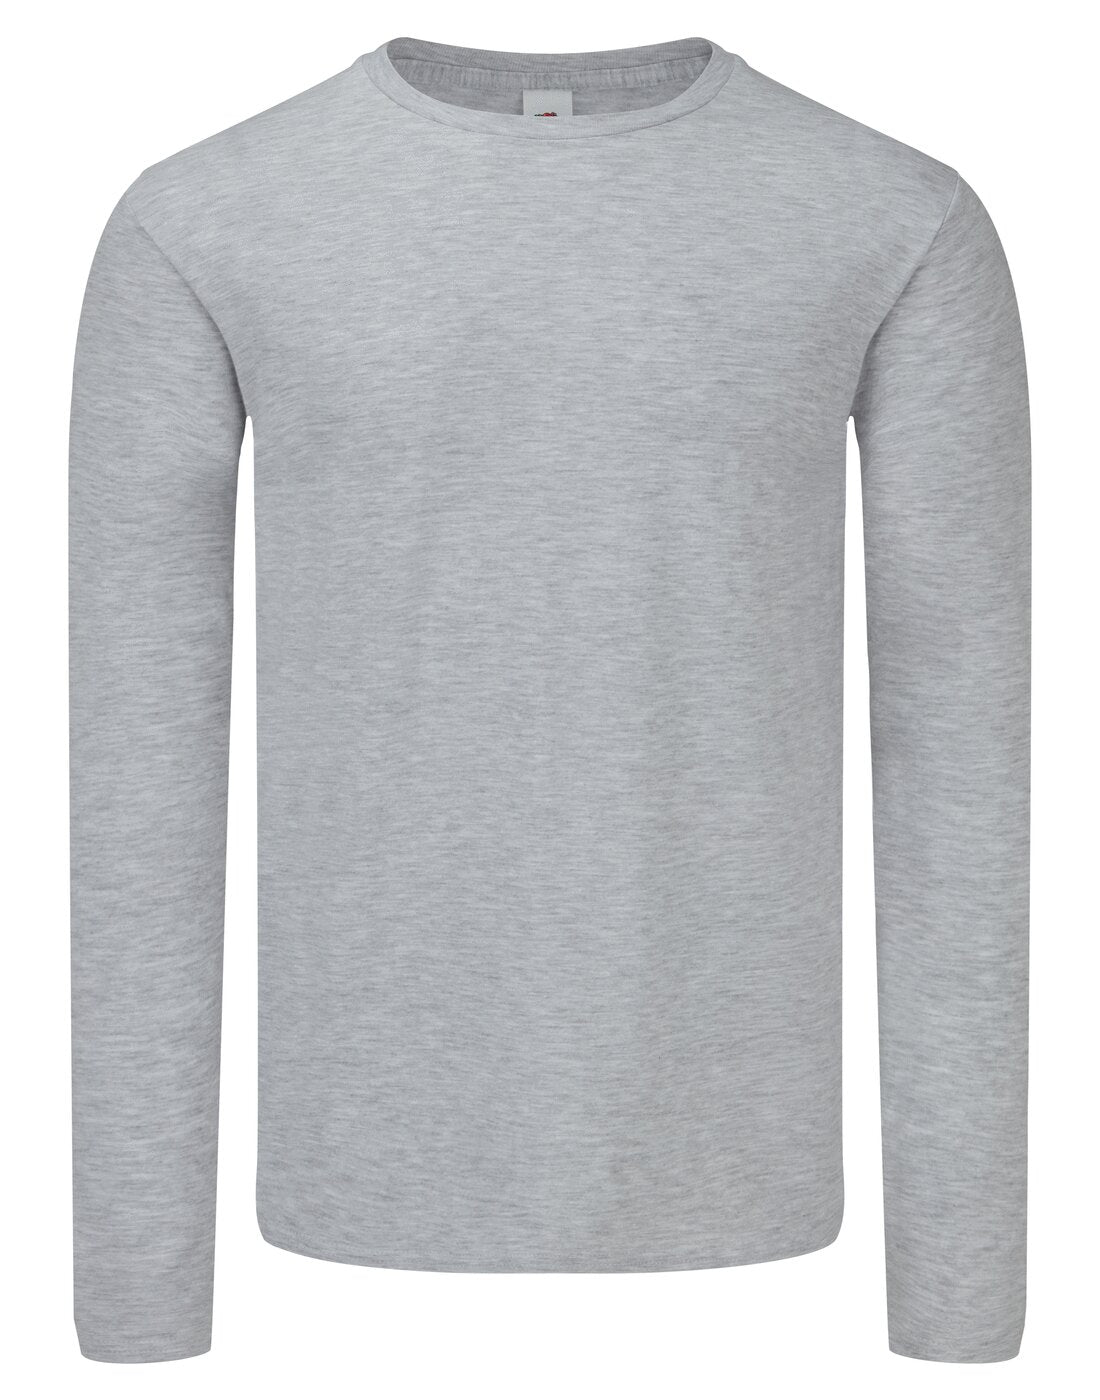 Fruit of the Loom Iconic 150 Classic Long Sleeve T - Heather